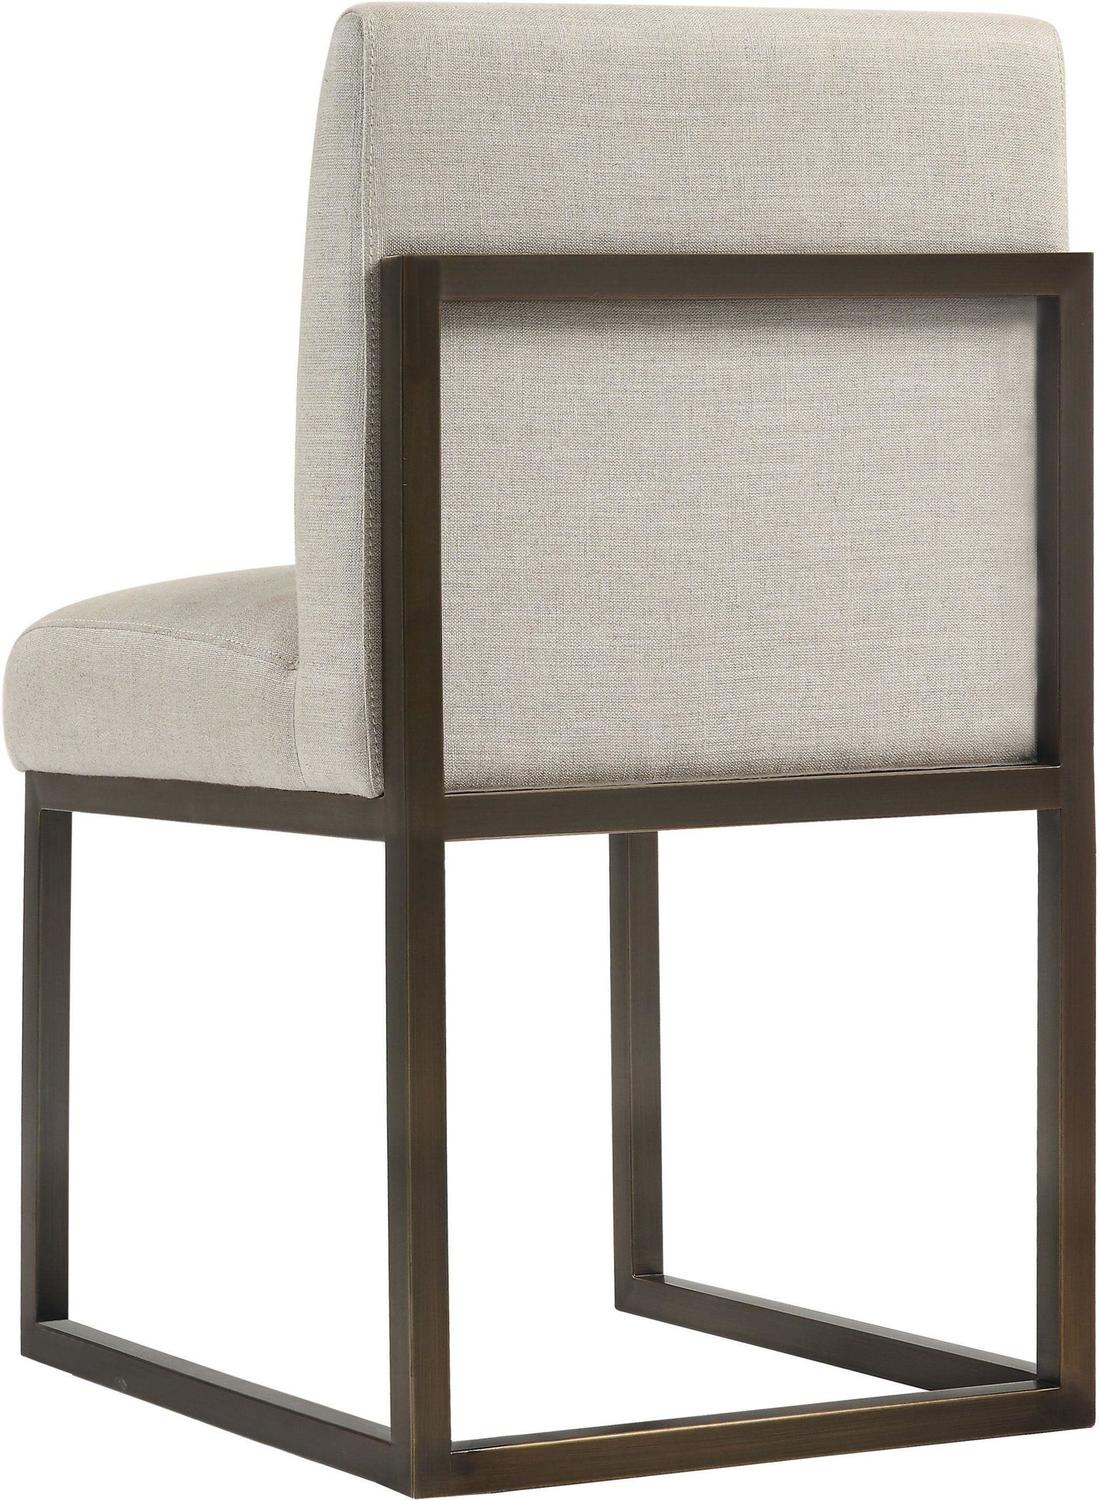 low lounge Contemporary Design Furniture Dining Chairs Chairs Beige